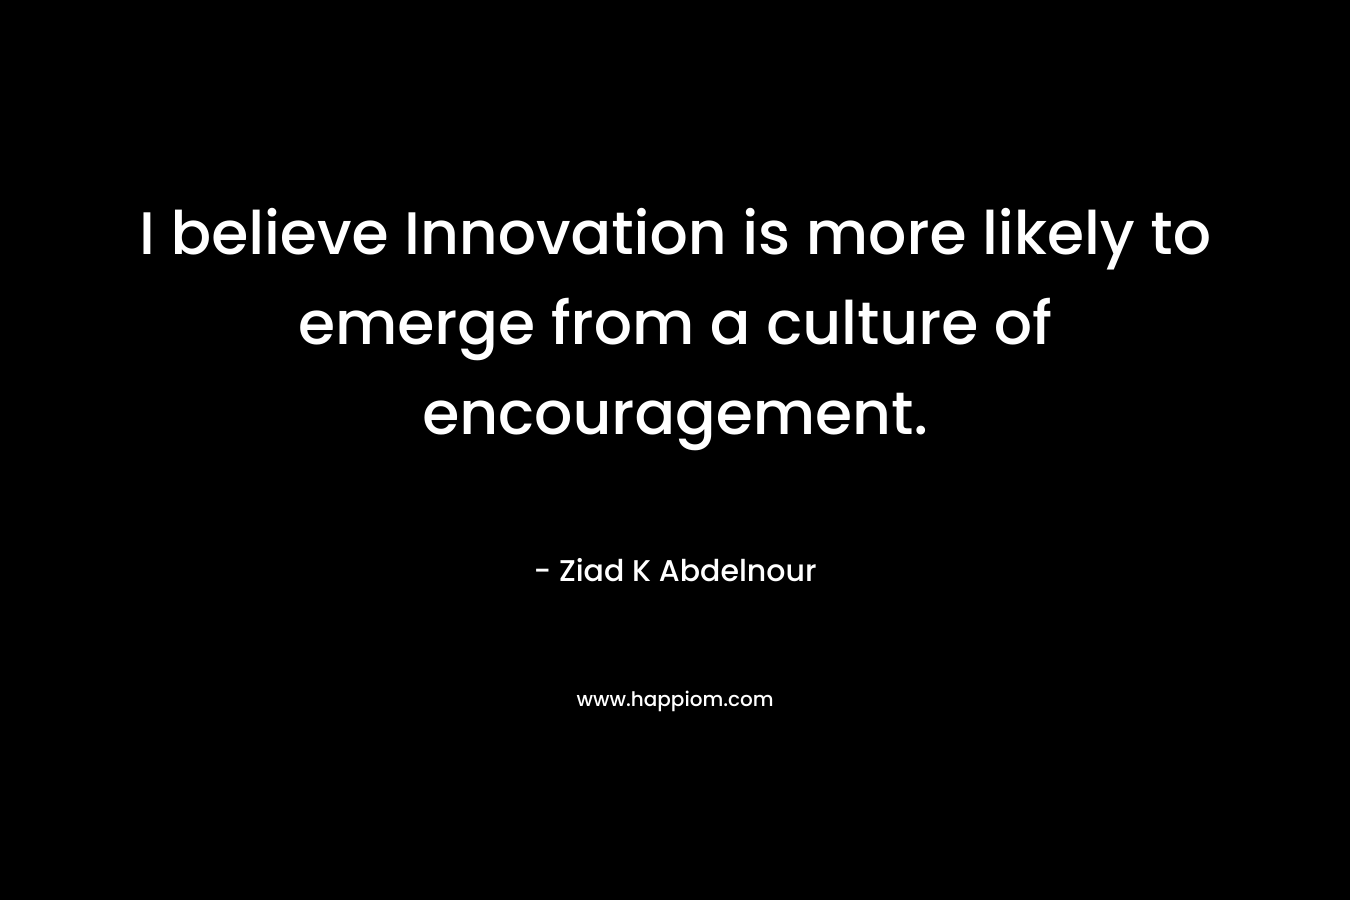 I believe Innovation is more likely to emerge from a culture of encouragement. – Ziad K Abdelnour